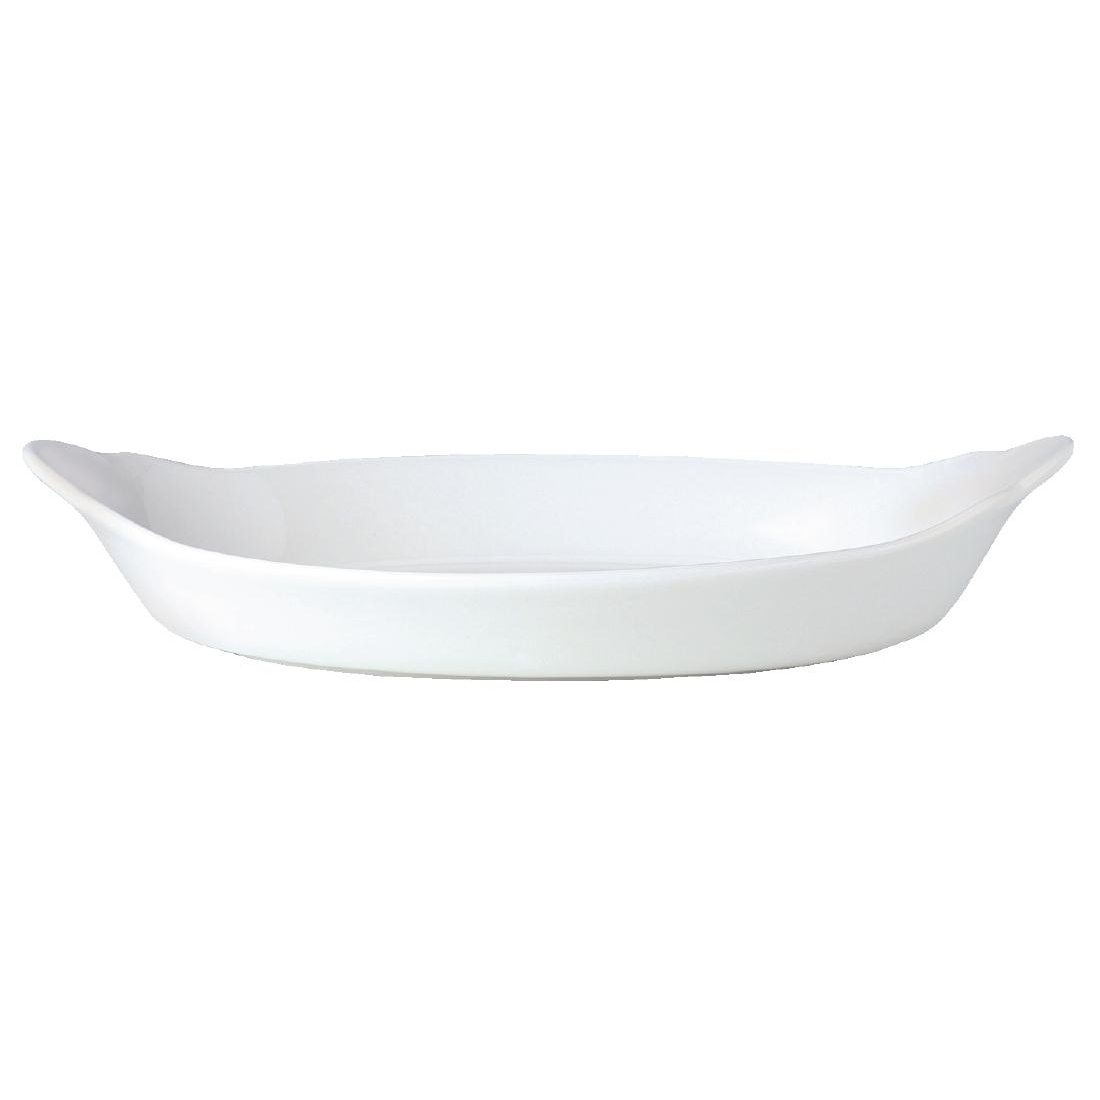 Steelite Simplicity Cookware Oval Eared Dishes 340mm